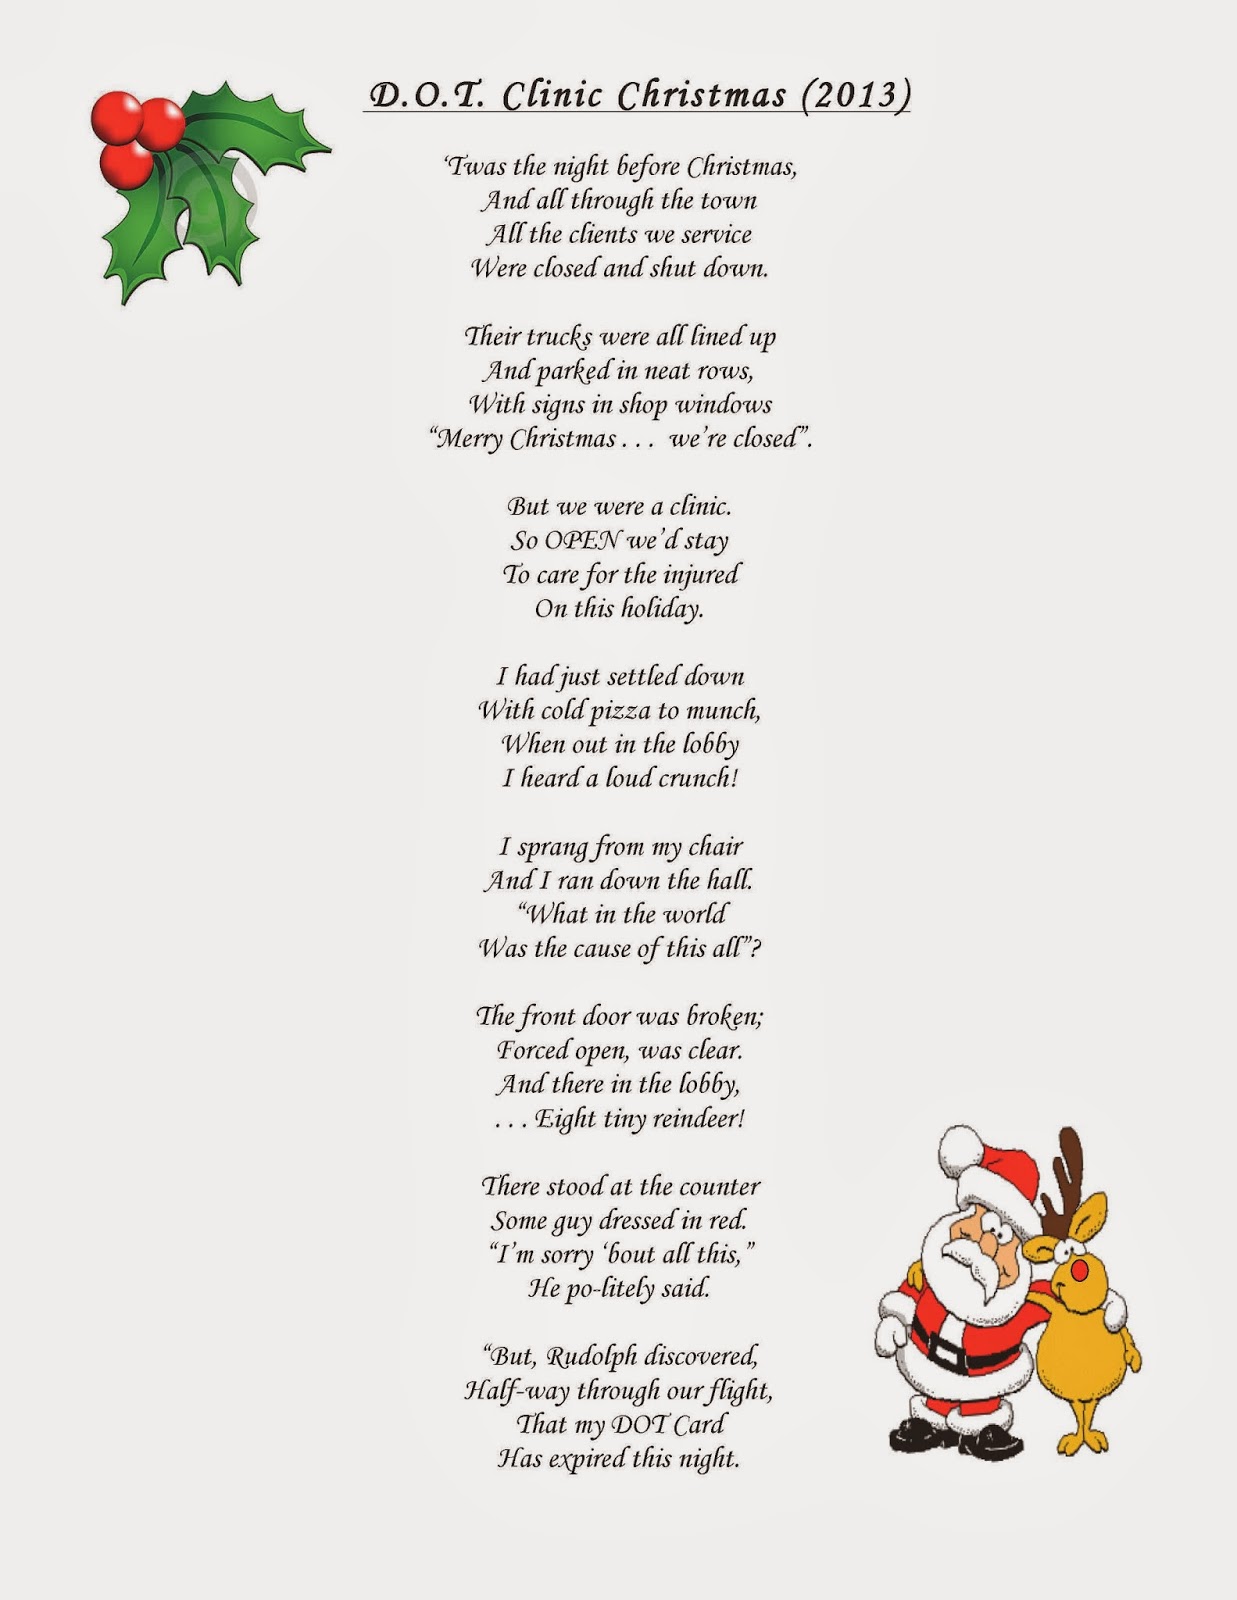 Workers' Compensation: D.O.T. Christmas Poem